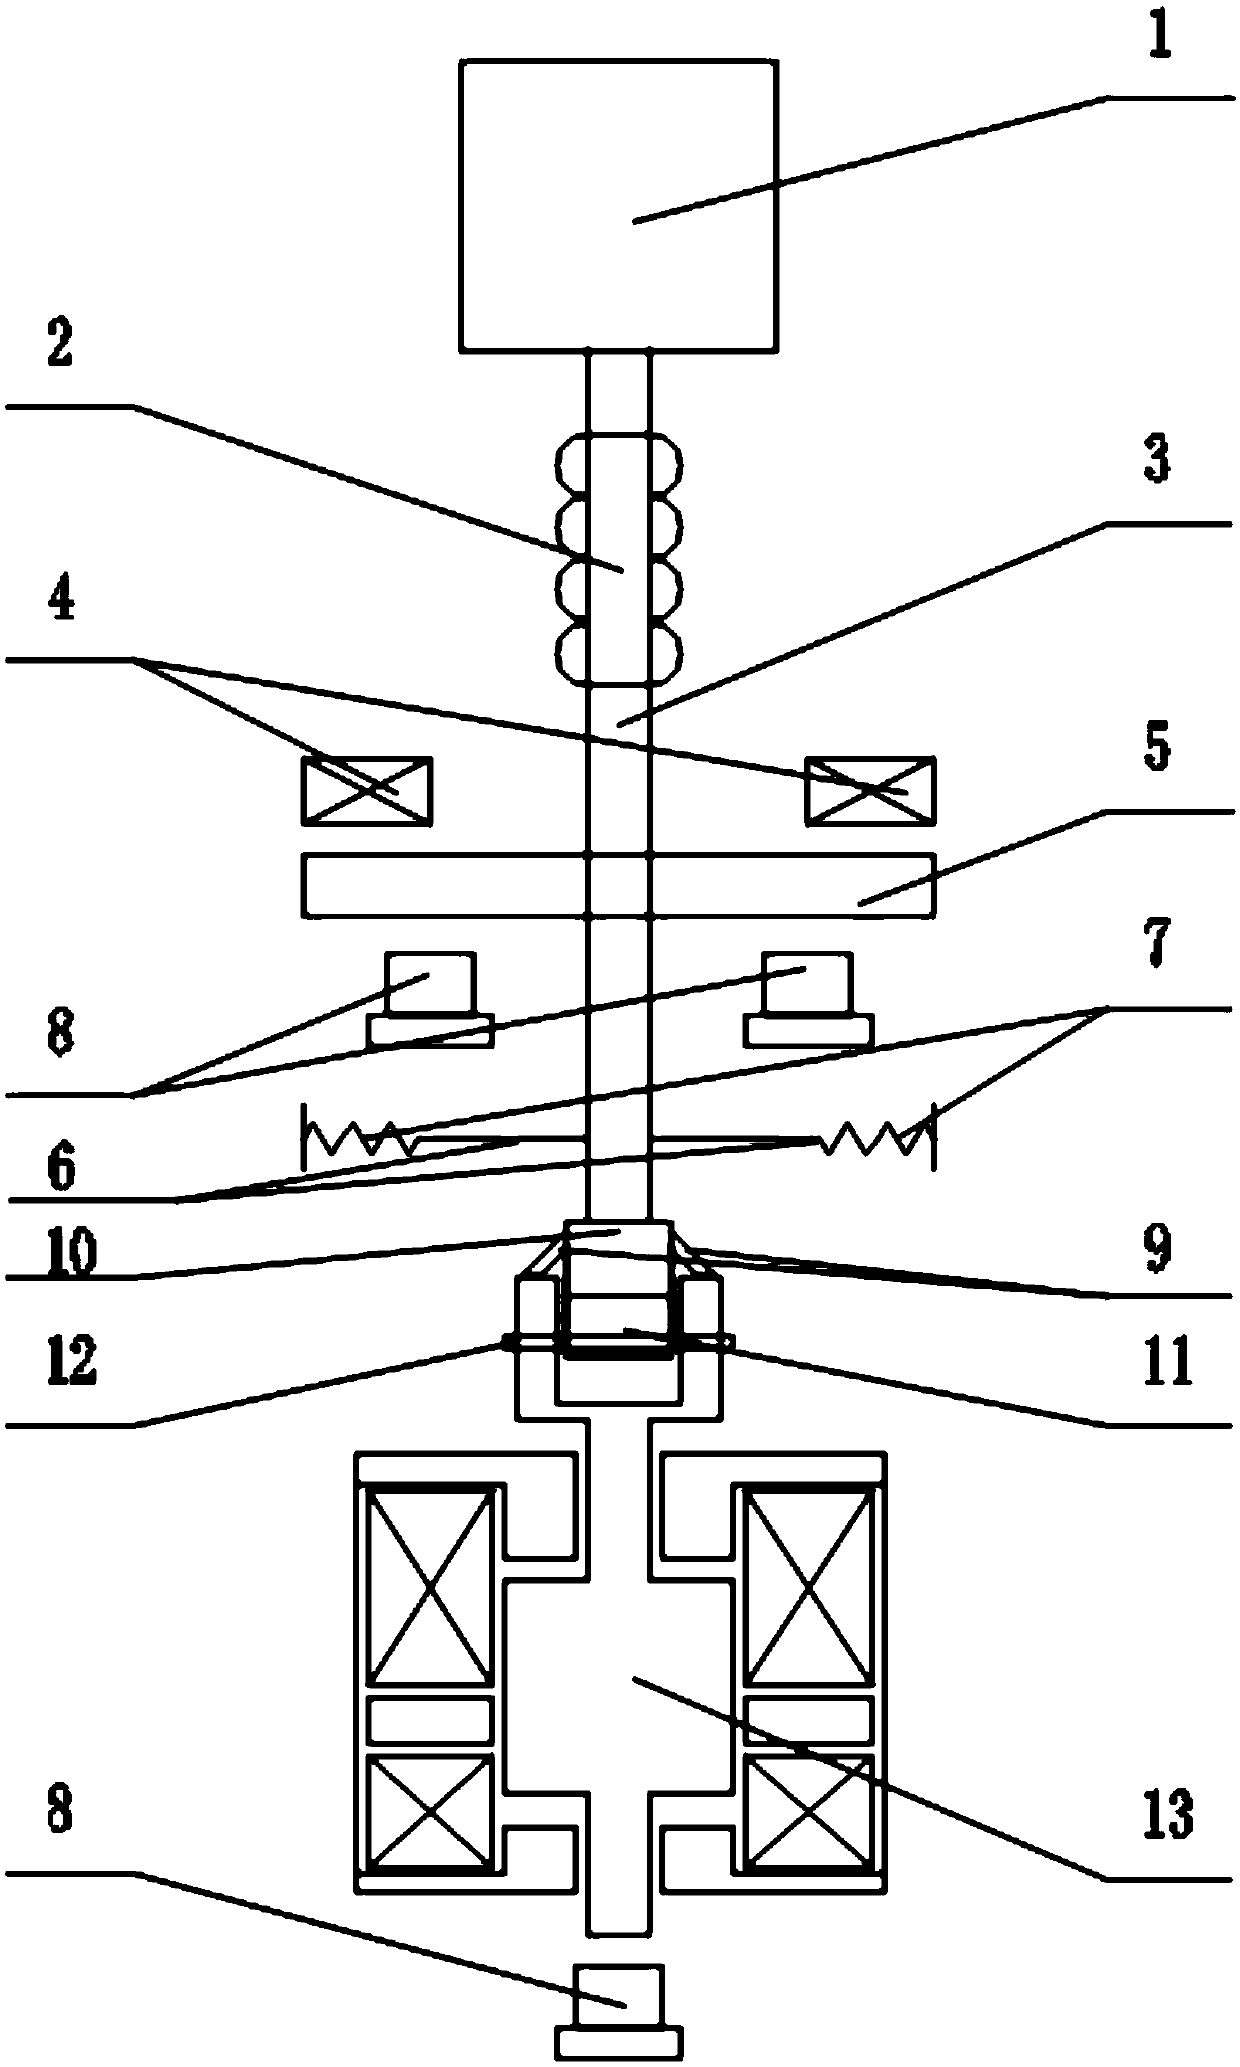 Mechanical quick switch based on electromagnetic repulsion mechanism